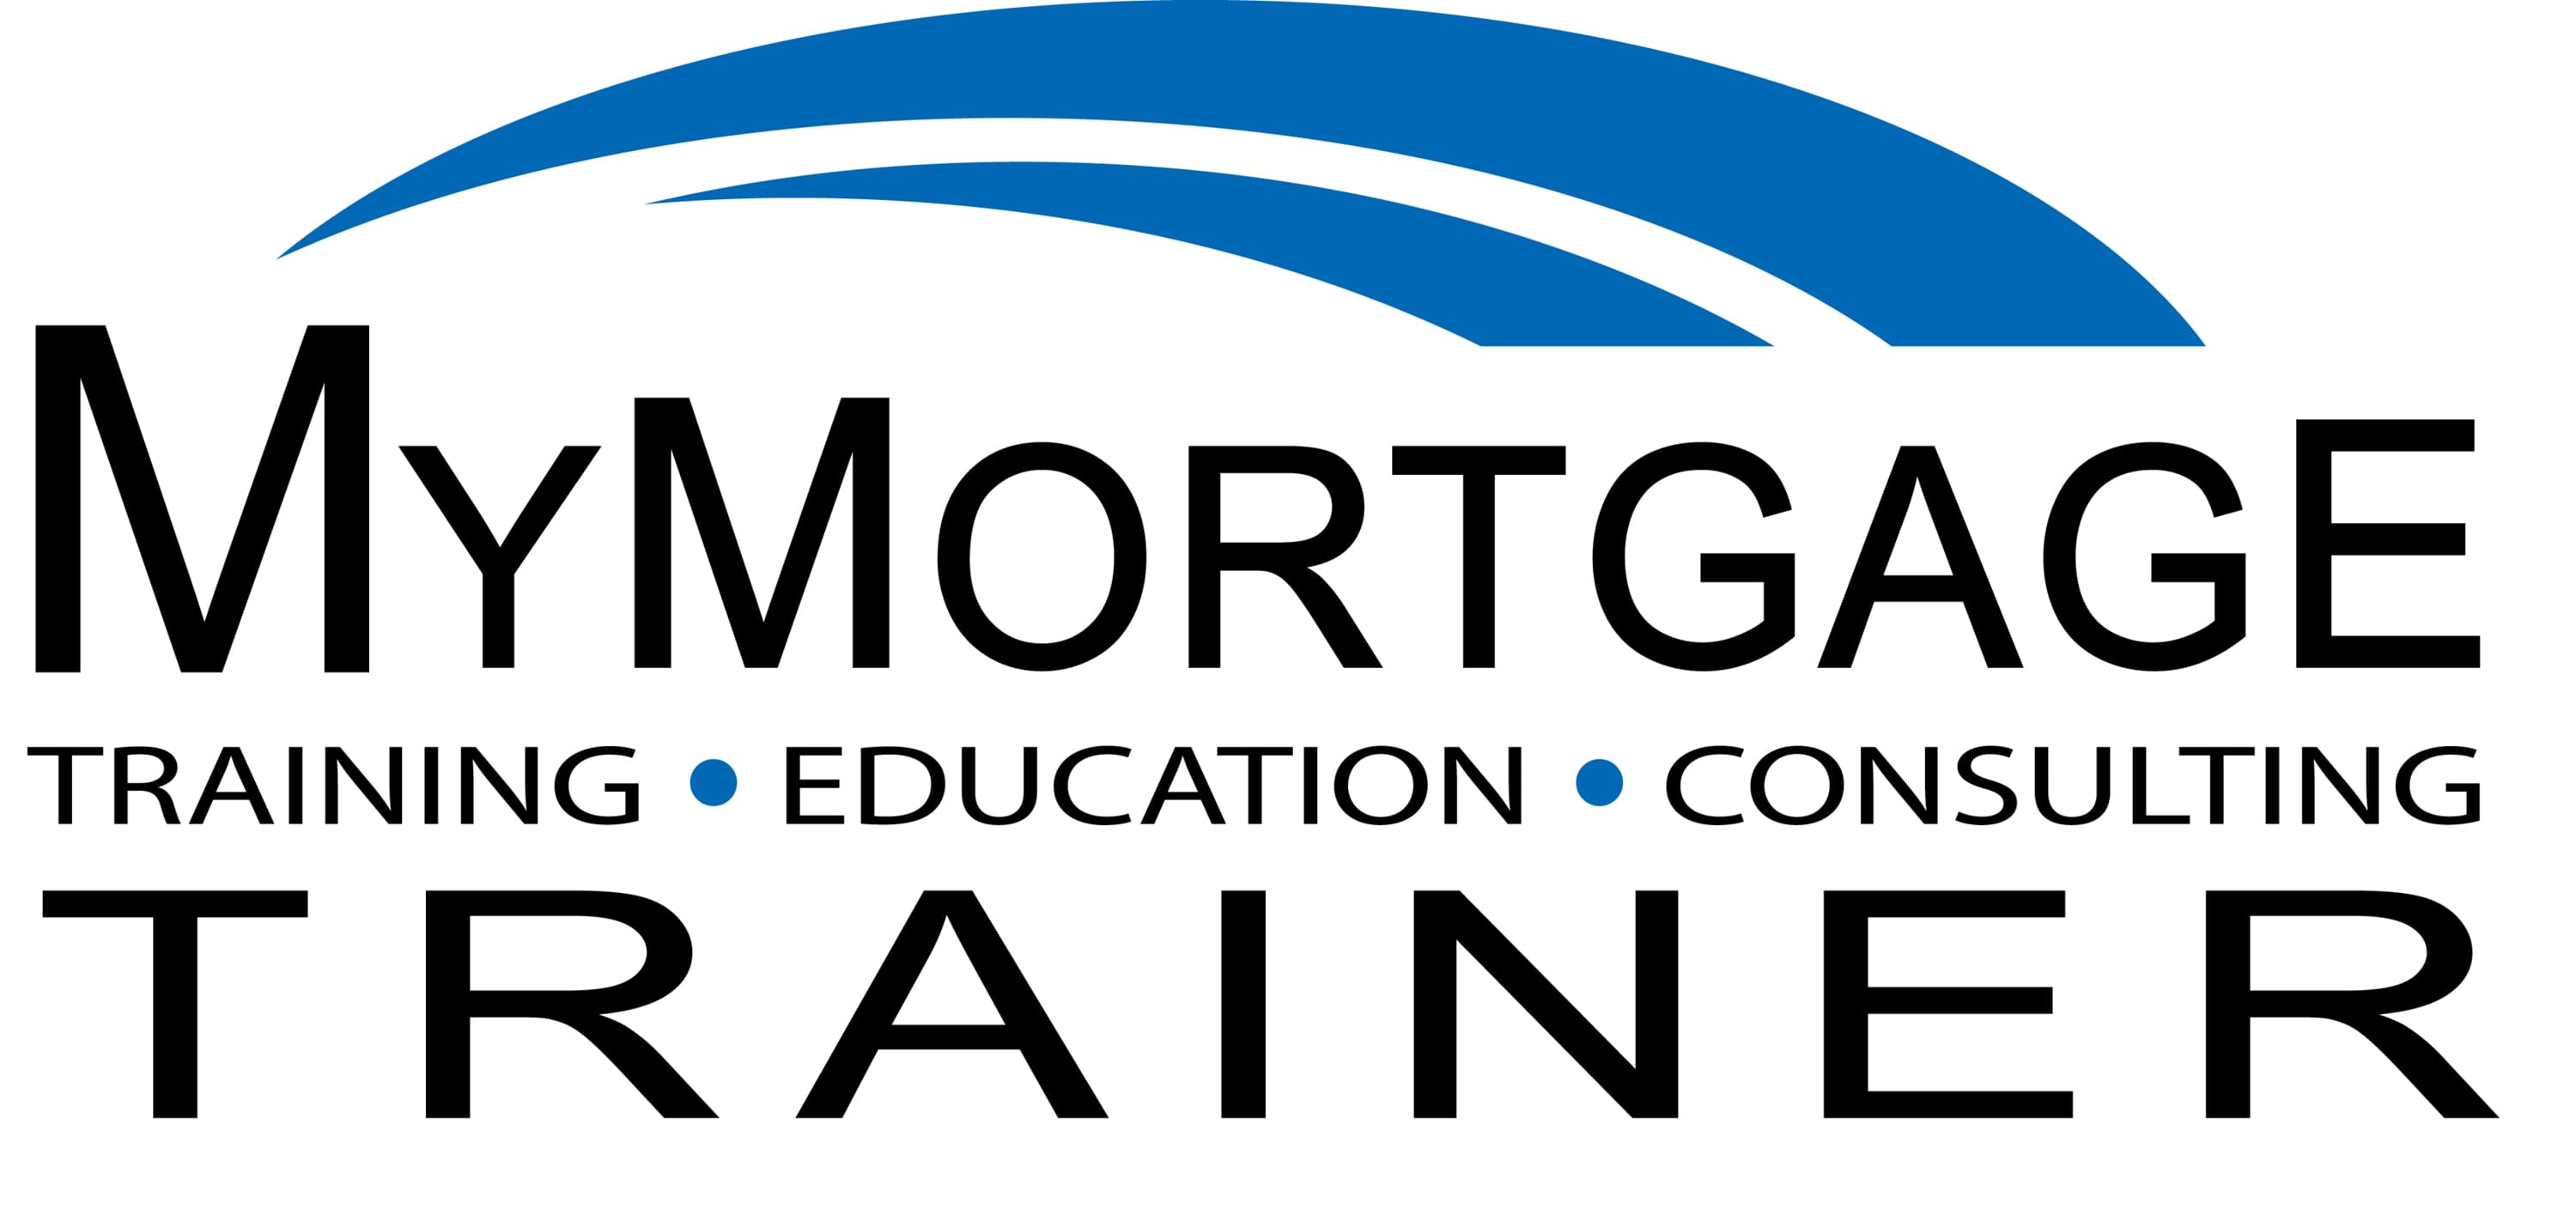 My Mortgage Trainer Course Selection Help